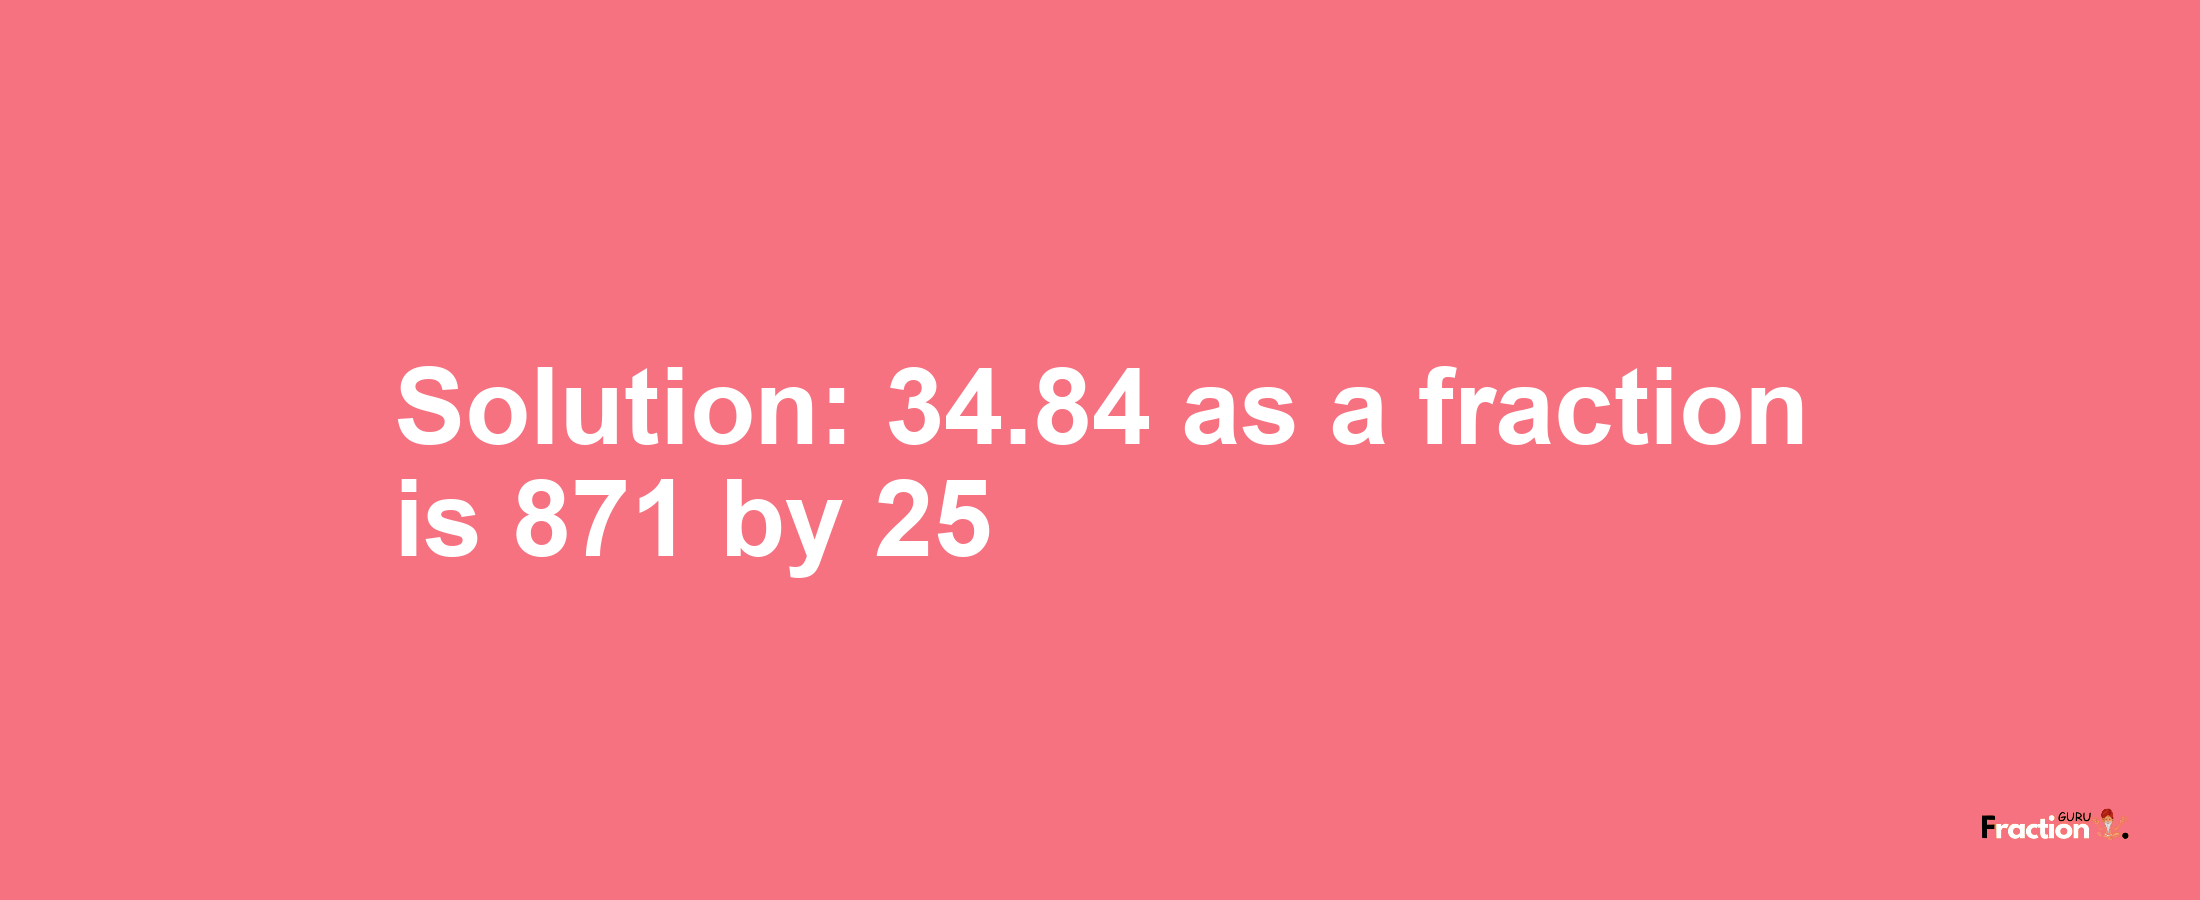 Solution:34.84 as a fraction is 871/25